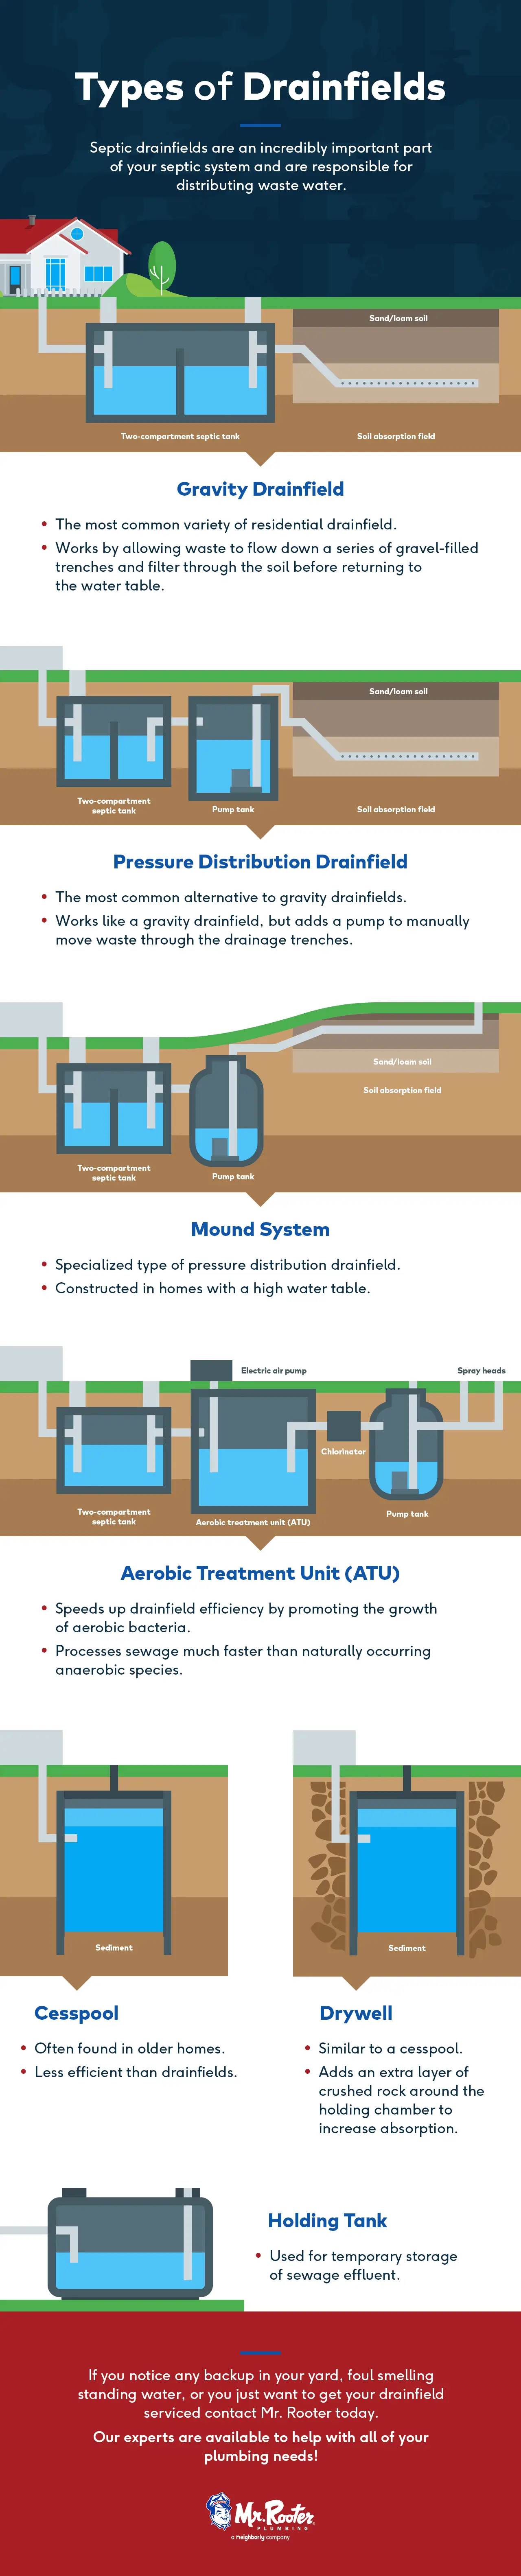 Types of Drainfield